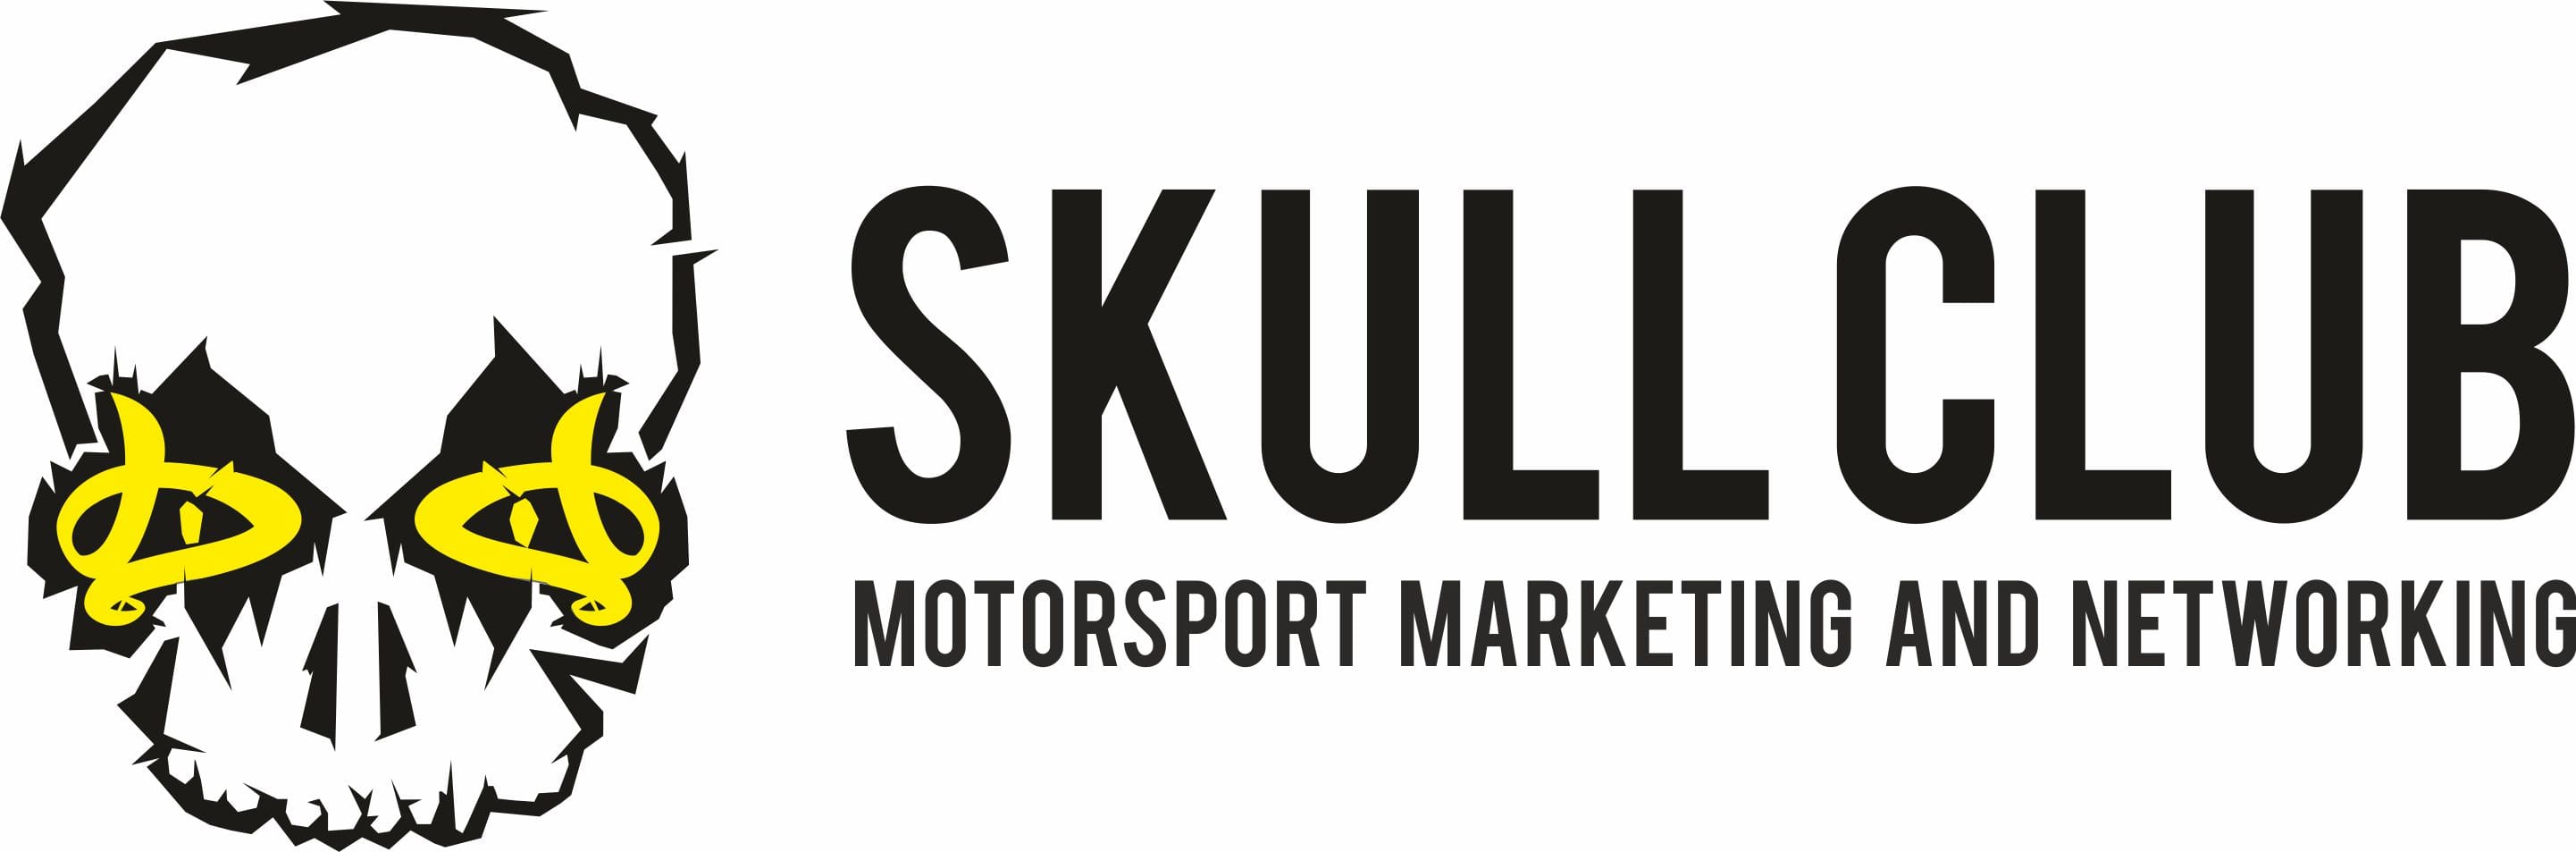 Motorsport Marketing and Networking with Skull Club | Skull Club